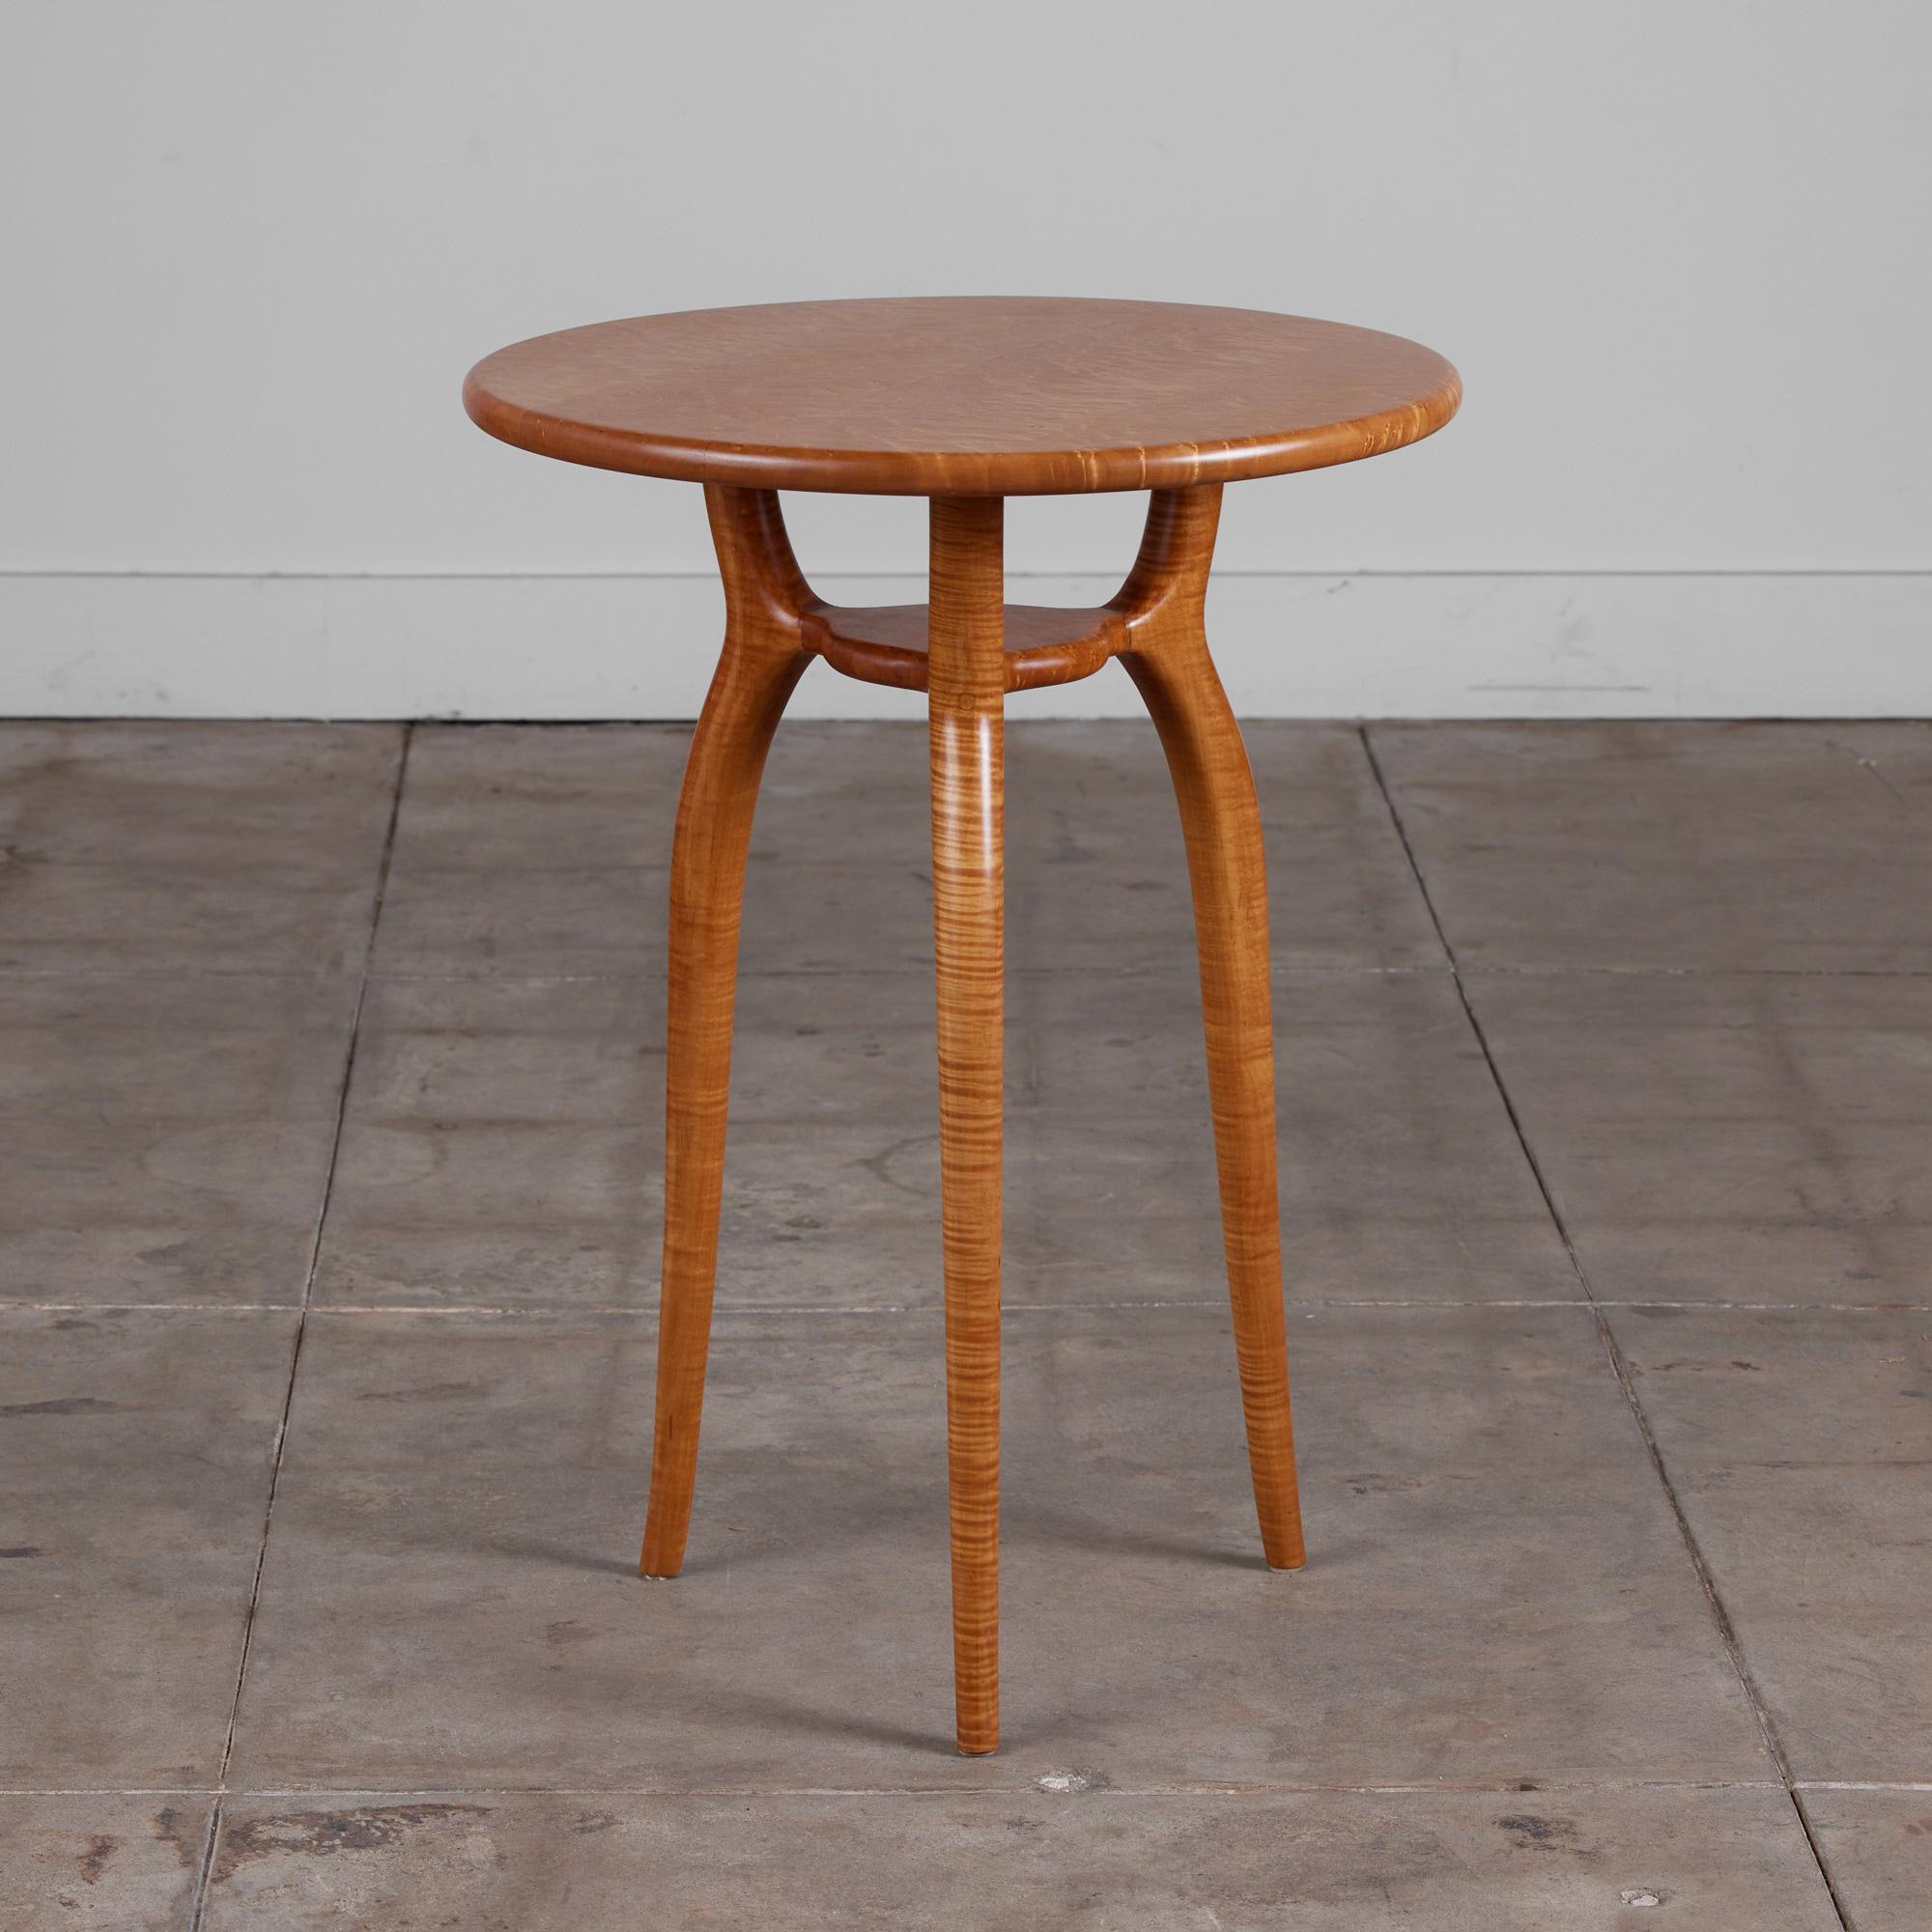 Studio pedestal or console height side table circa 1976. This table top is crafted from solid Bird's Eye and the sculpted legs are comprised of Tiger Maple. The contrasting wood makes for an exciting and elegant finish to this organic shaped